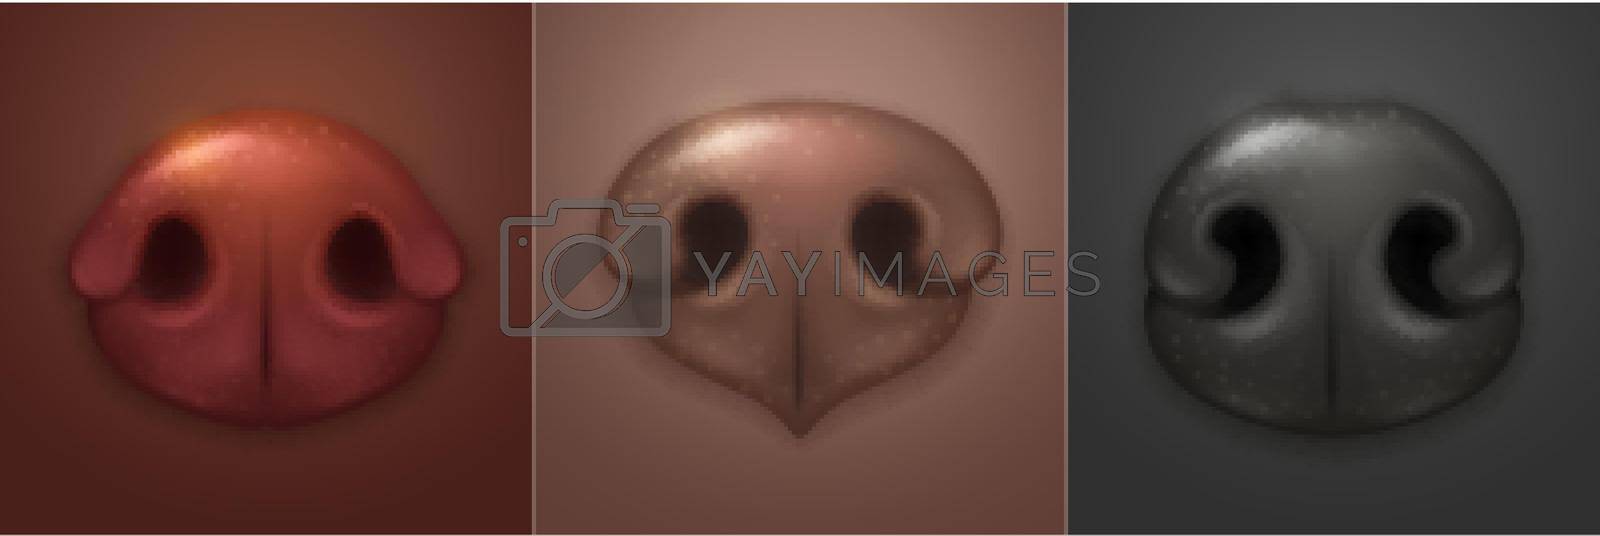 Cute dog noses, canine snout front. Vector realistic illustrations of part of dog or puppy face, brown and black noses of pets different breed. Animal muzzle print